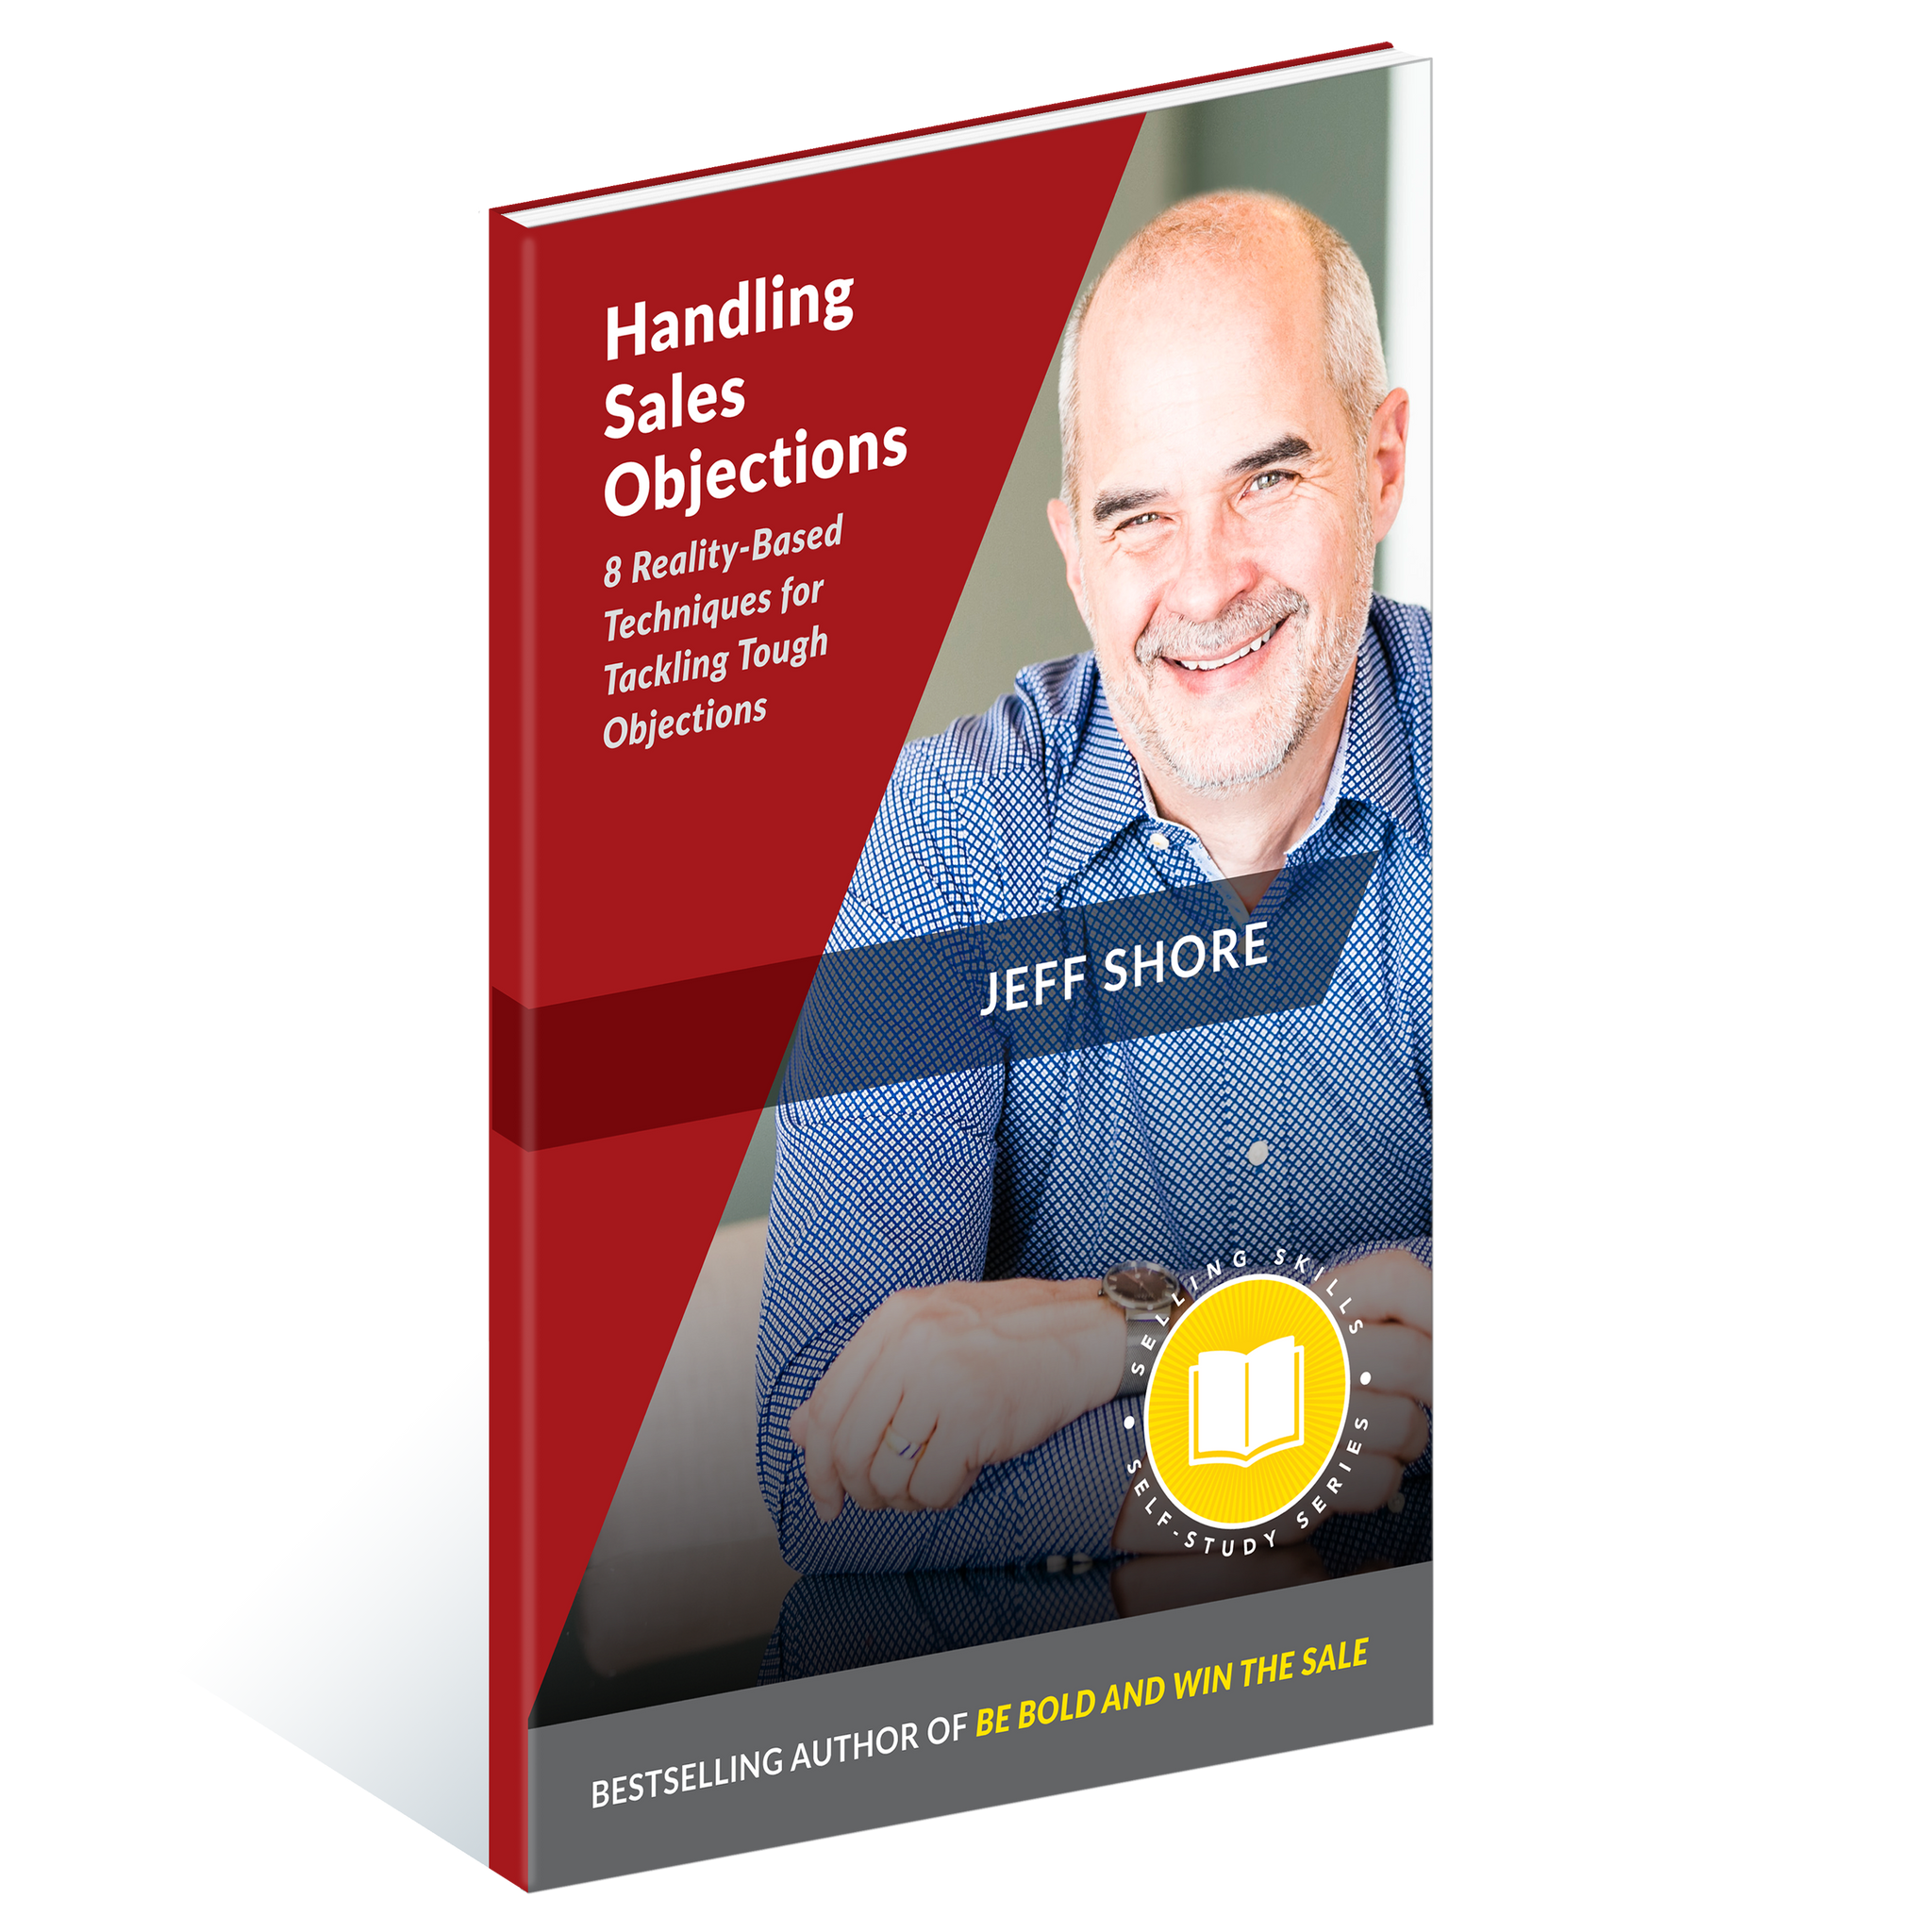 Handling Sales Objections Self-Study Book